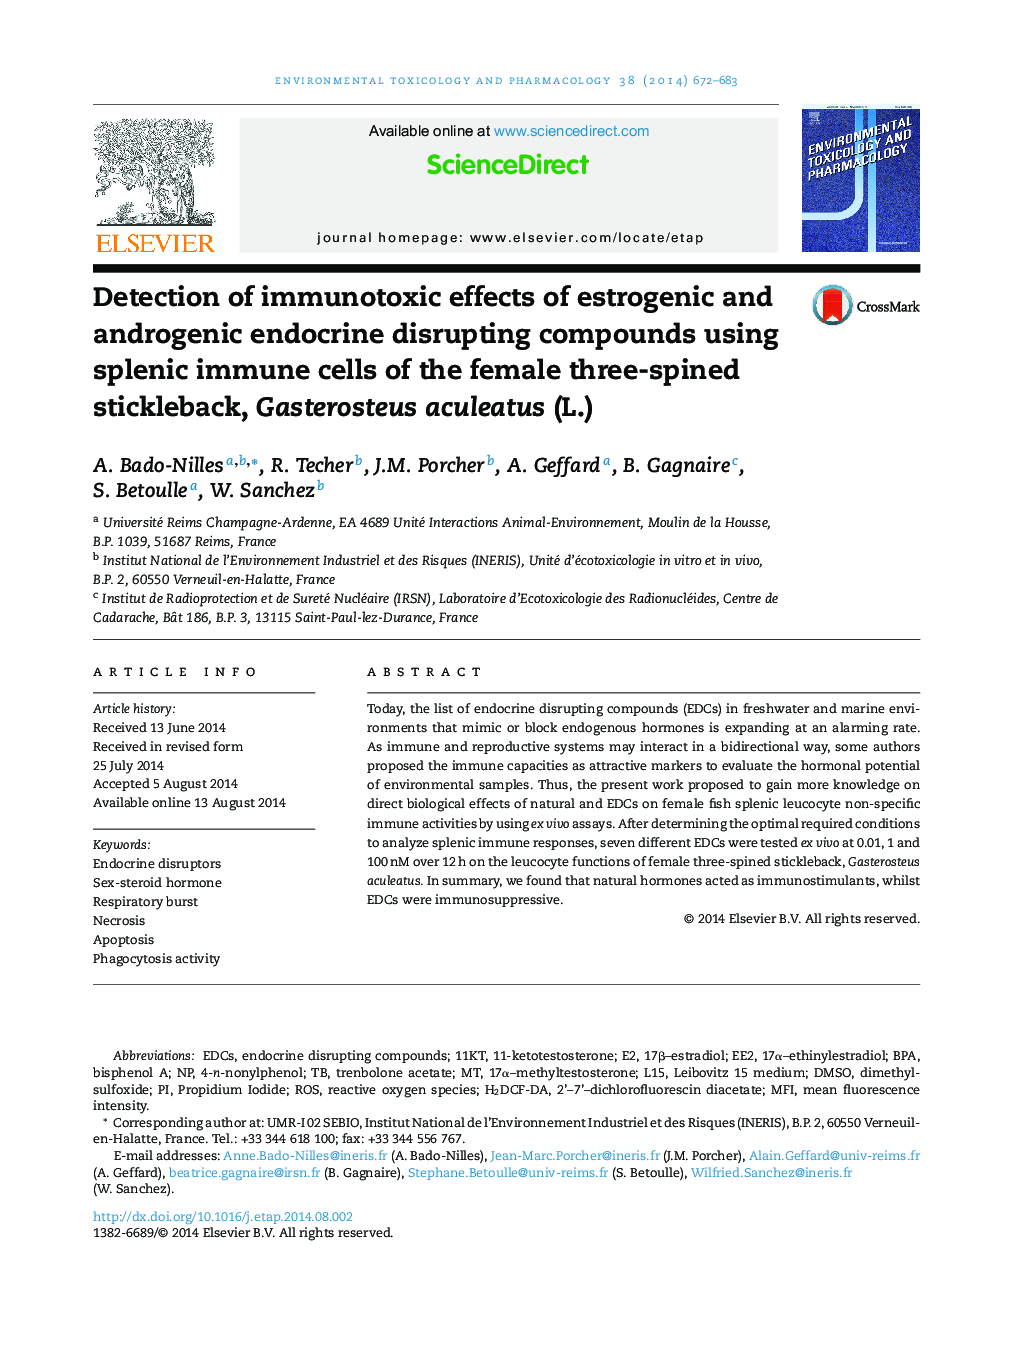 Detection of immunotoxic effects of estrogenic and androgenic endocrine disrupting compounds using splenic immune cells of the female three-spined stickleback, Gasterosteus aculeatus (L.)